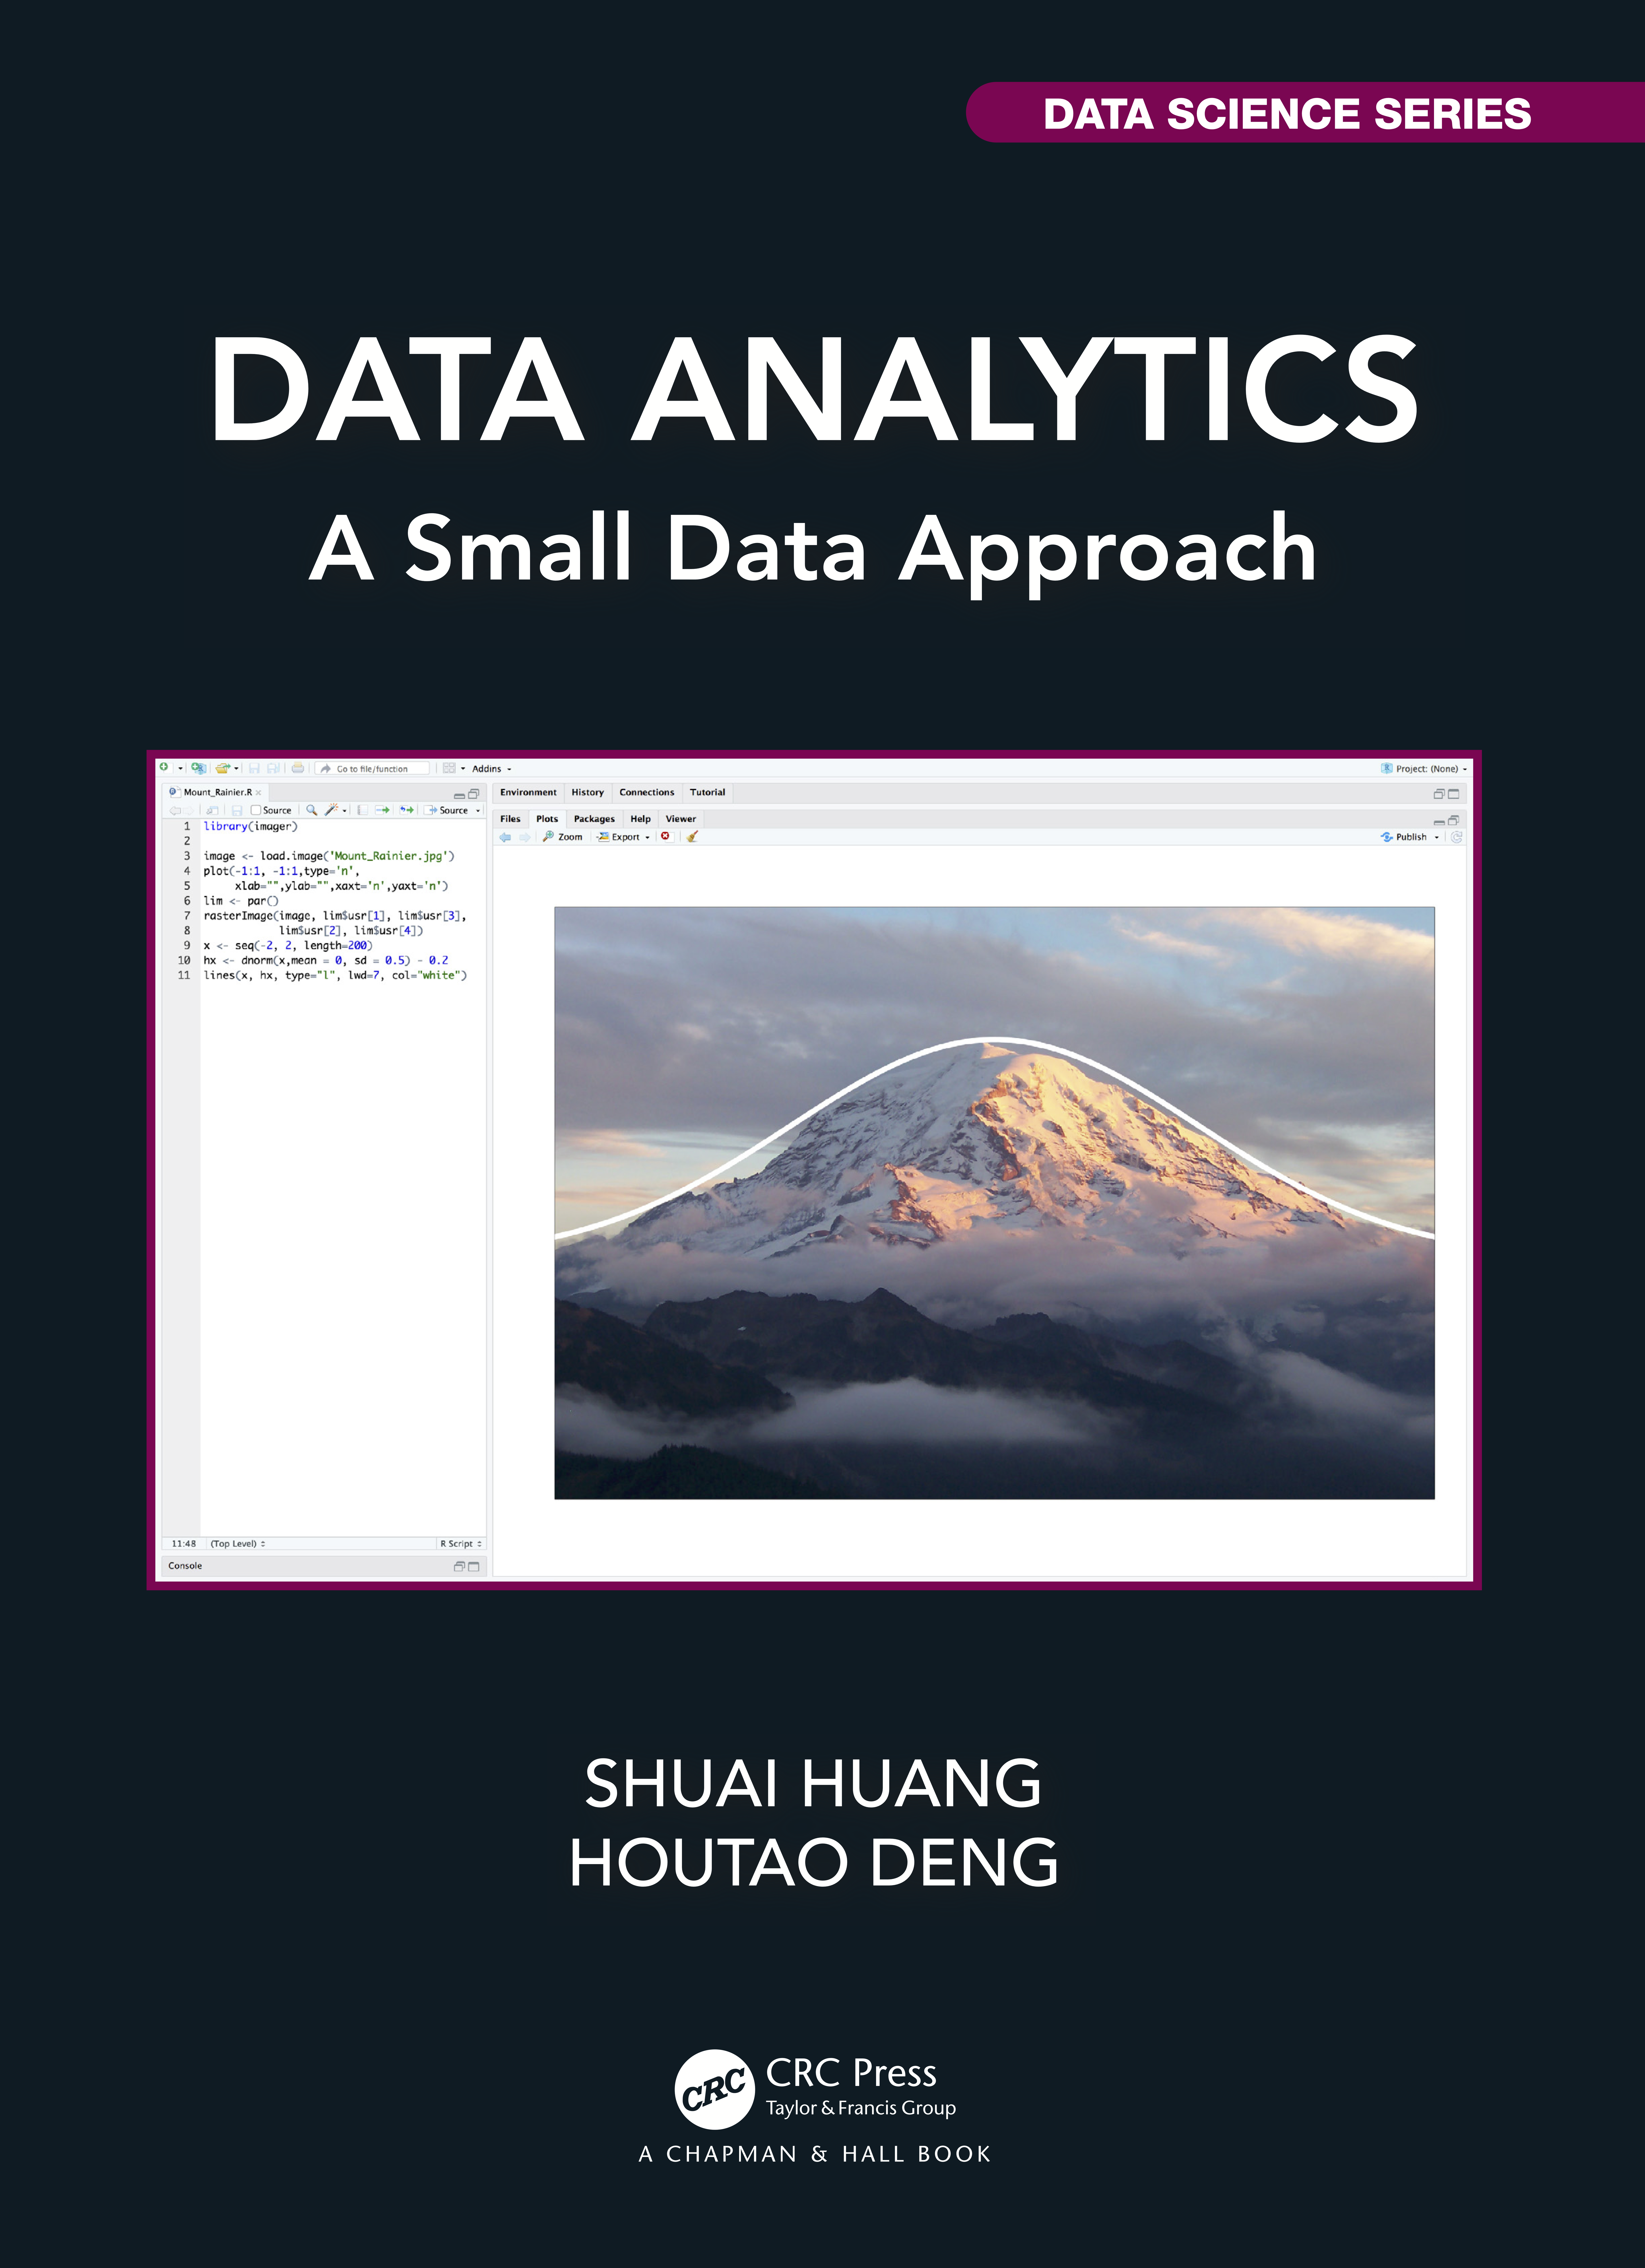  <br><br>    <span style="color: black;"> Shuai Huang and Houtao Deng. Data Analytics: A Small Data Approach. Chapman and Hall/CRC, 2021. </span> <br><br><br>       <span style="color: blue;">[Code and data](https://github.com/analyticsbook/book)</span> <br><br>   <span style="color: blue;">[Buy a hard copy or leave feedback on Amazon](https://amzn.to/3ZHHYWb)</span> <br><br>  <span style="color: blue;">[Contact us](mailto:hello@dataanalyticsbook.info)</span> <br> 